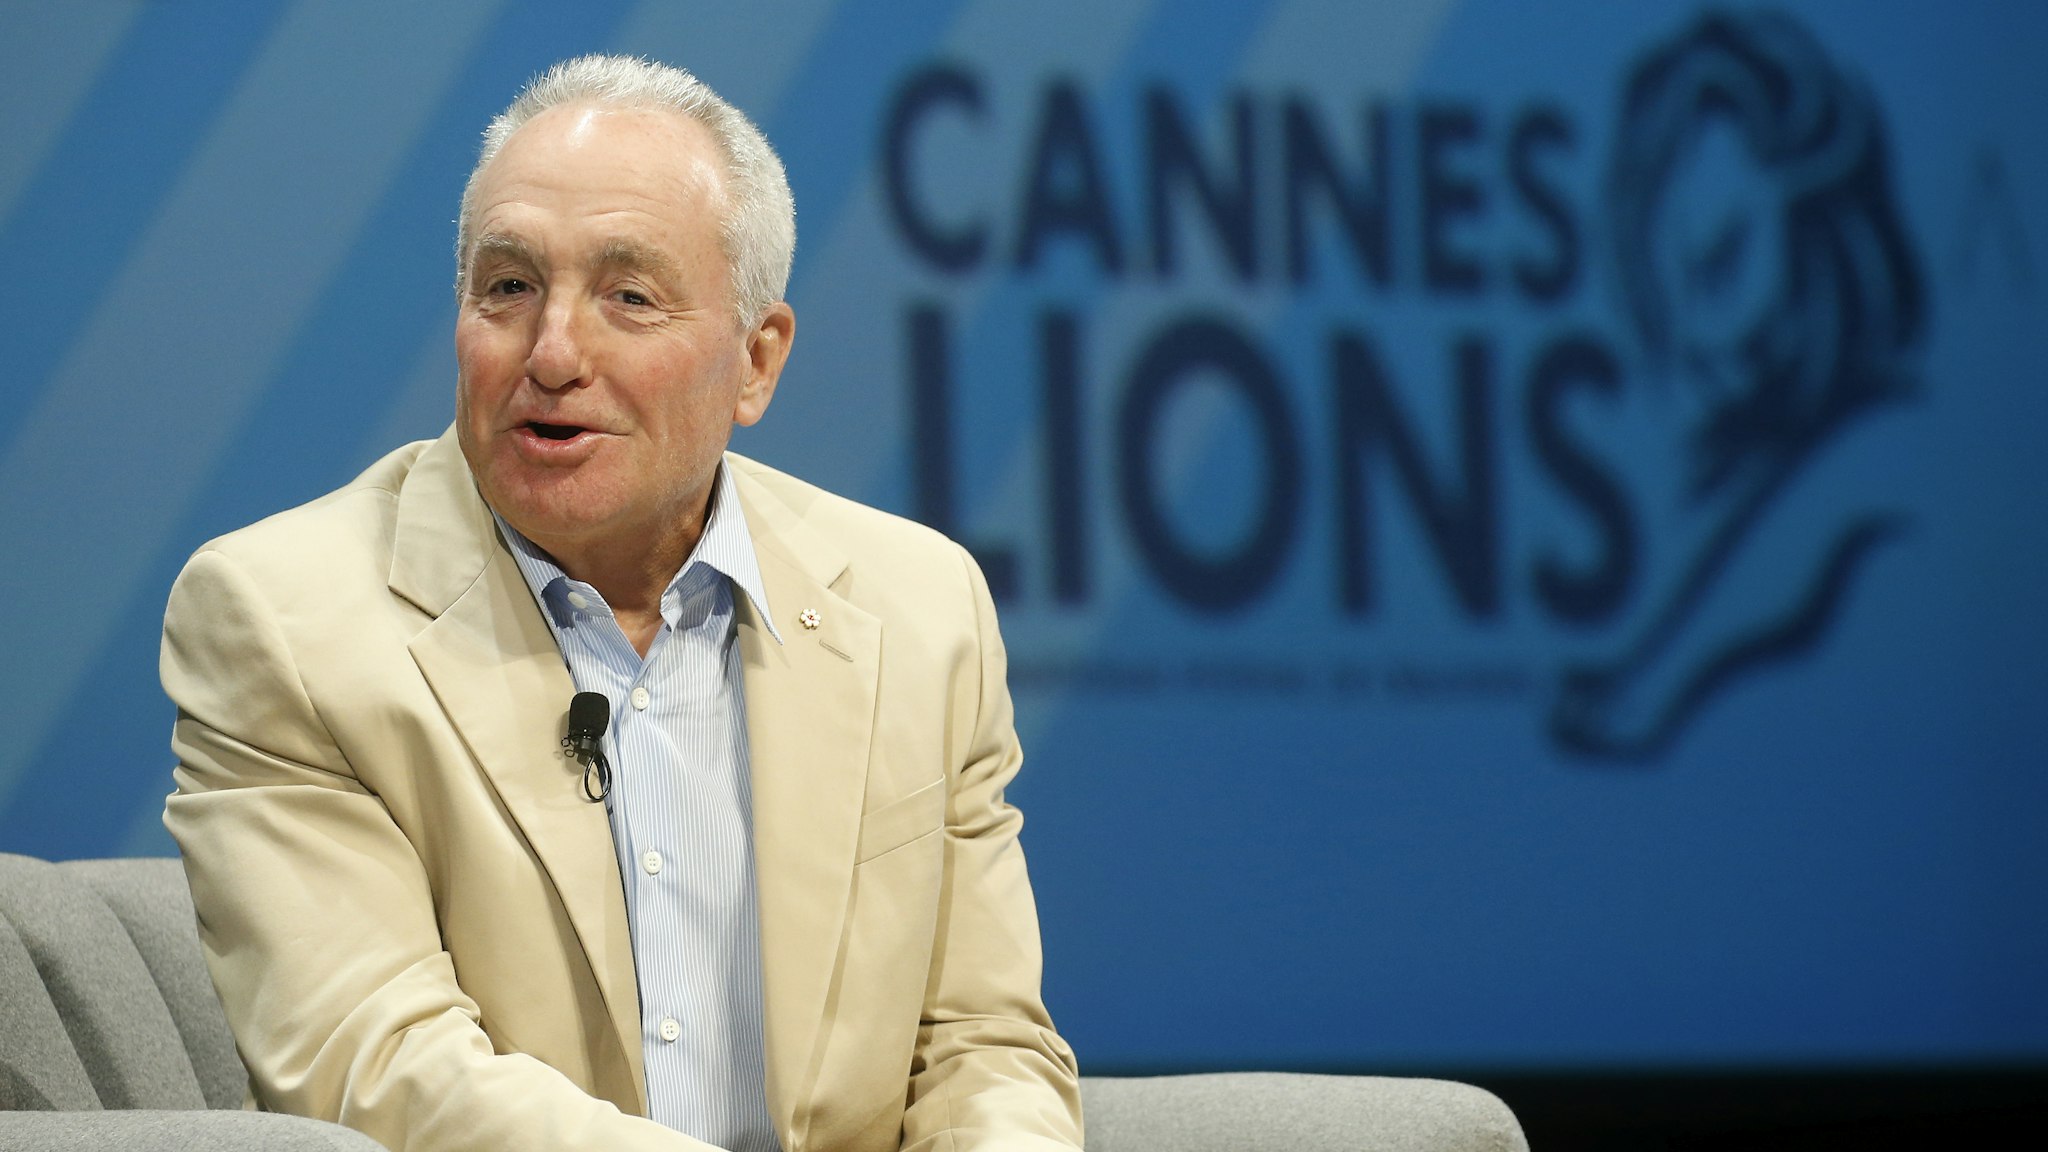 CANNES, FRANCE - JUNE 21: Creator and Executive Producer, 'Saturday Night Live' Lorne Michaels speaks on stage during the NBC session at the Cannes Lions 2019 : Day Five on June 21, 2019 in Cannes, France. (Photo by Richard Bord/Getty Images for Cannes Lions)